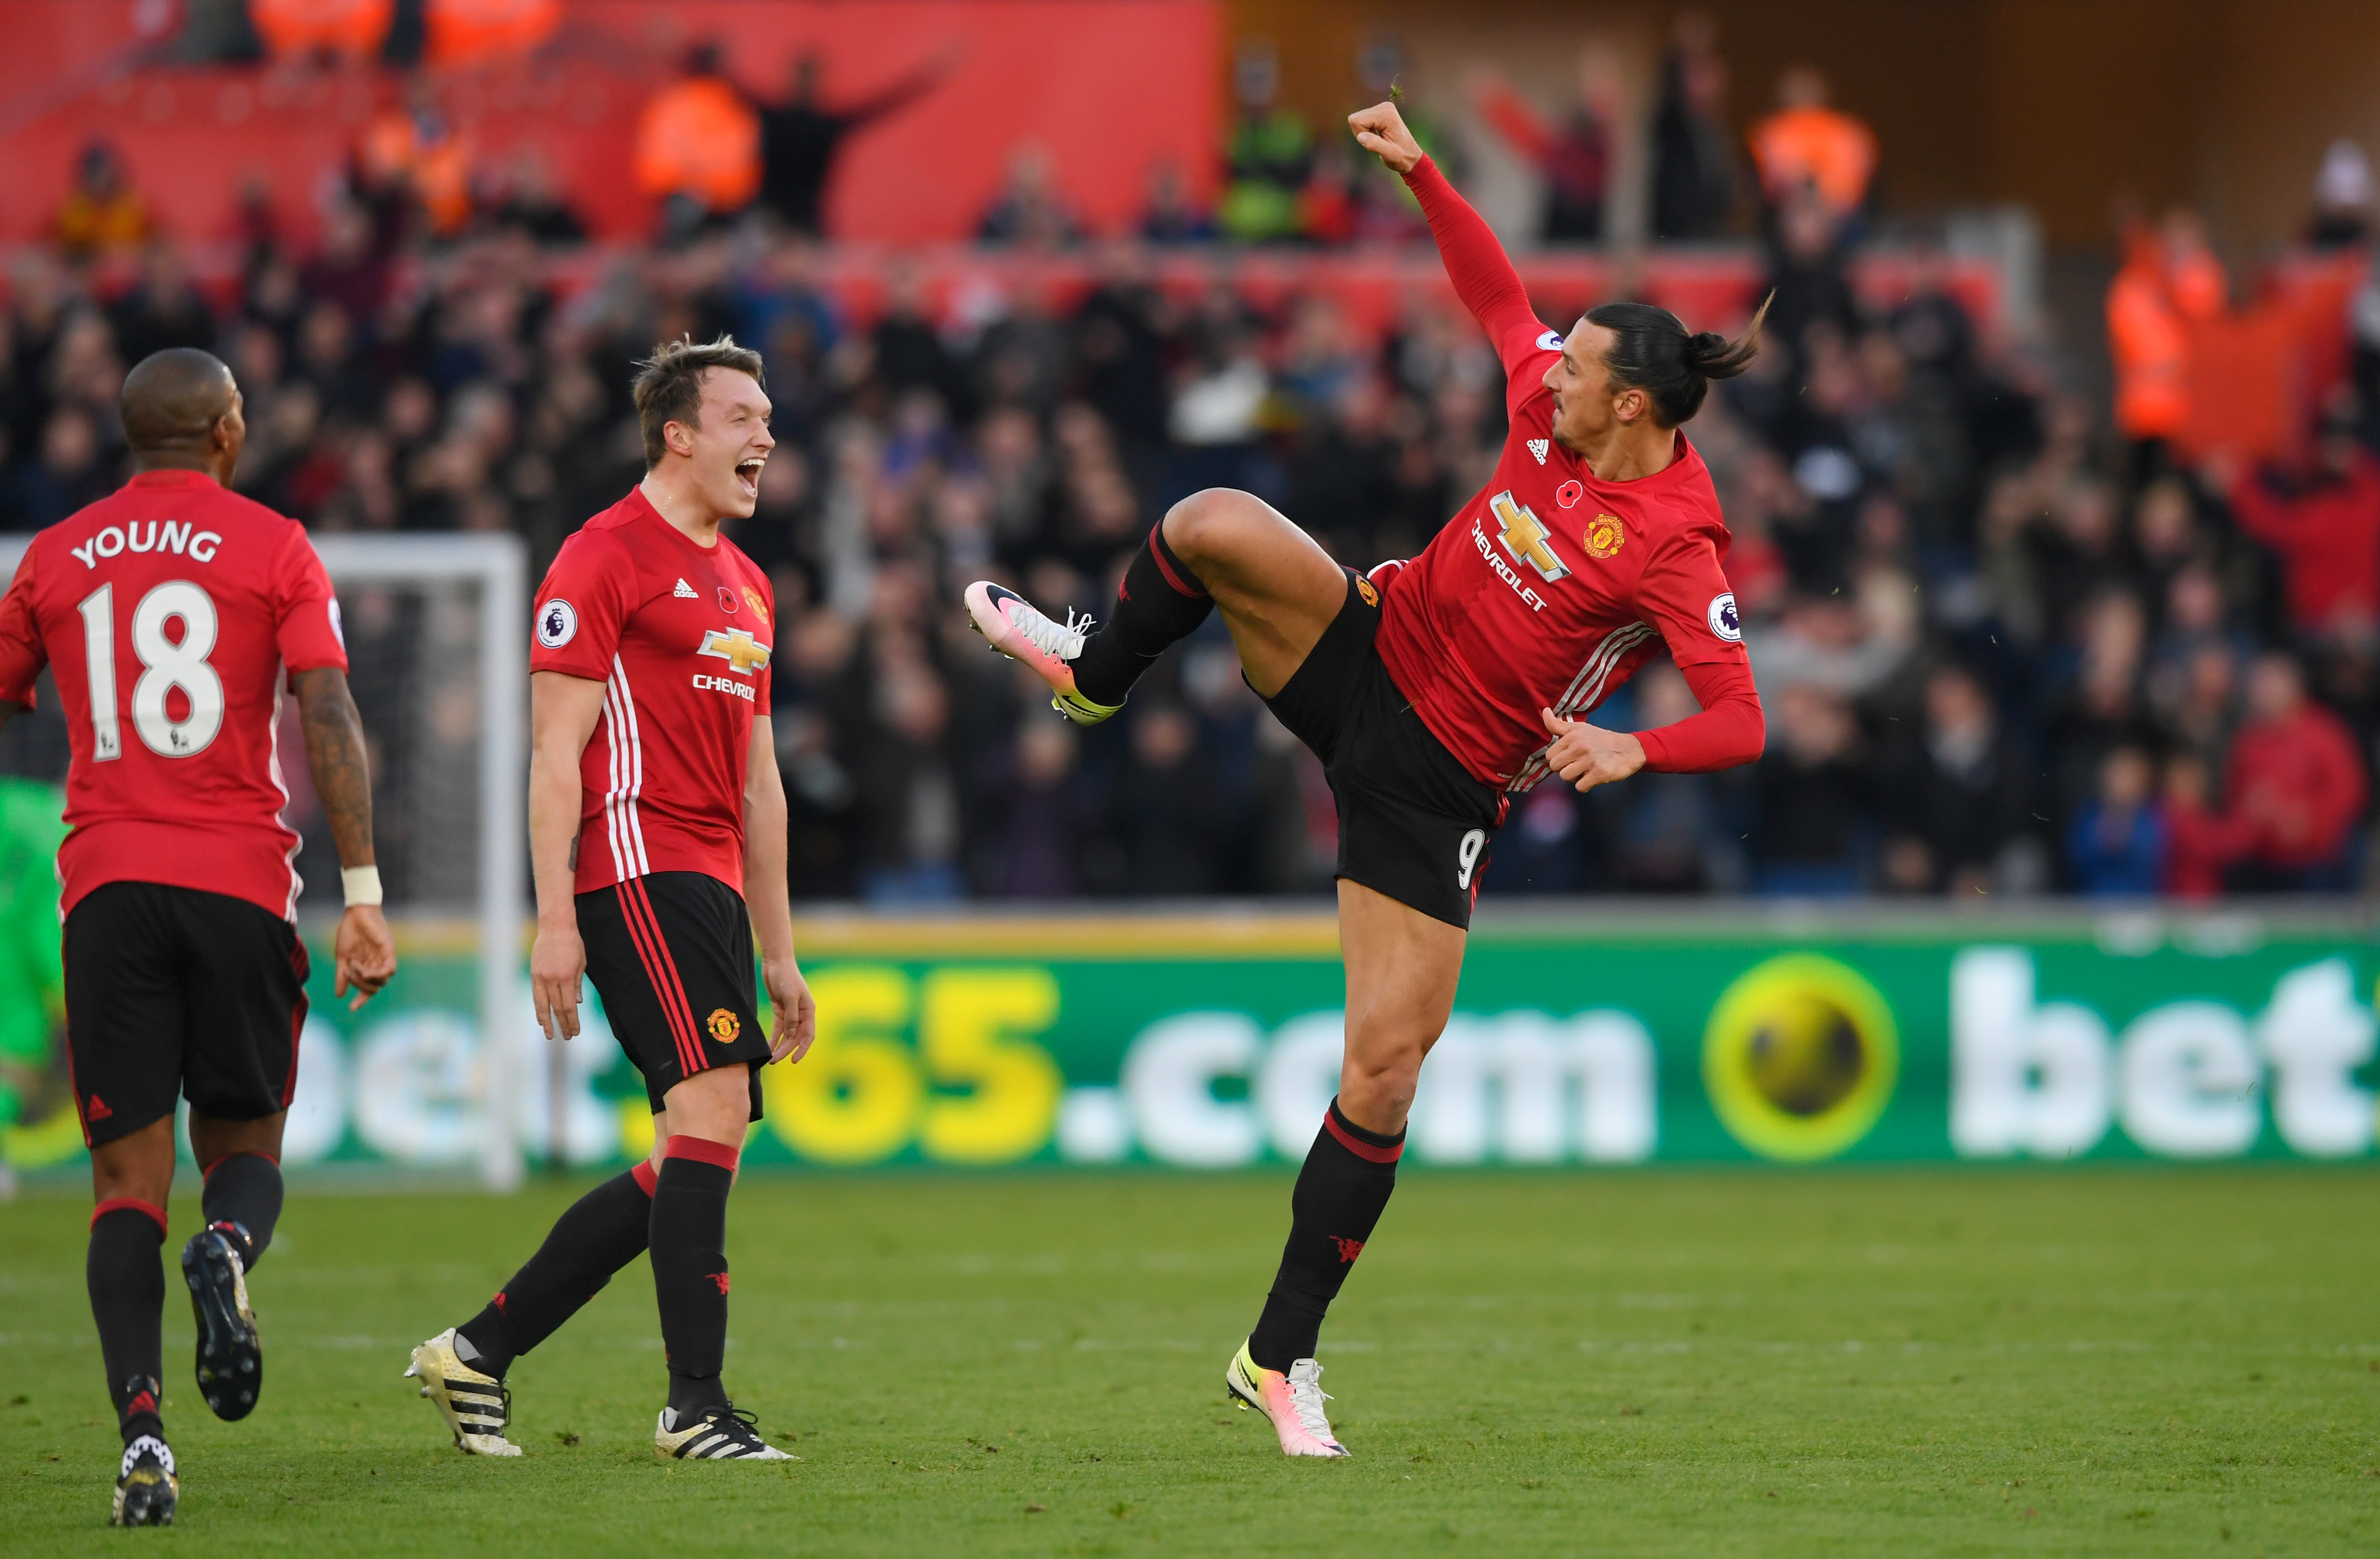 SWANSEA, WALES - NOVEMBER 06:  Zlatan Ibrahimovic of Manchester United celebrates scoring his sides second goal with Phil Jones of Manchester United during the Premier League match between Swansea City and Manchester United at Liberty Stadium on November 6, 2016 in Swansea, Wales.  (Photo by Stu Forster/Getty Images)